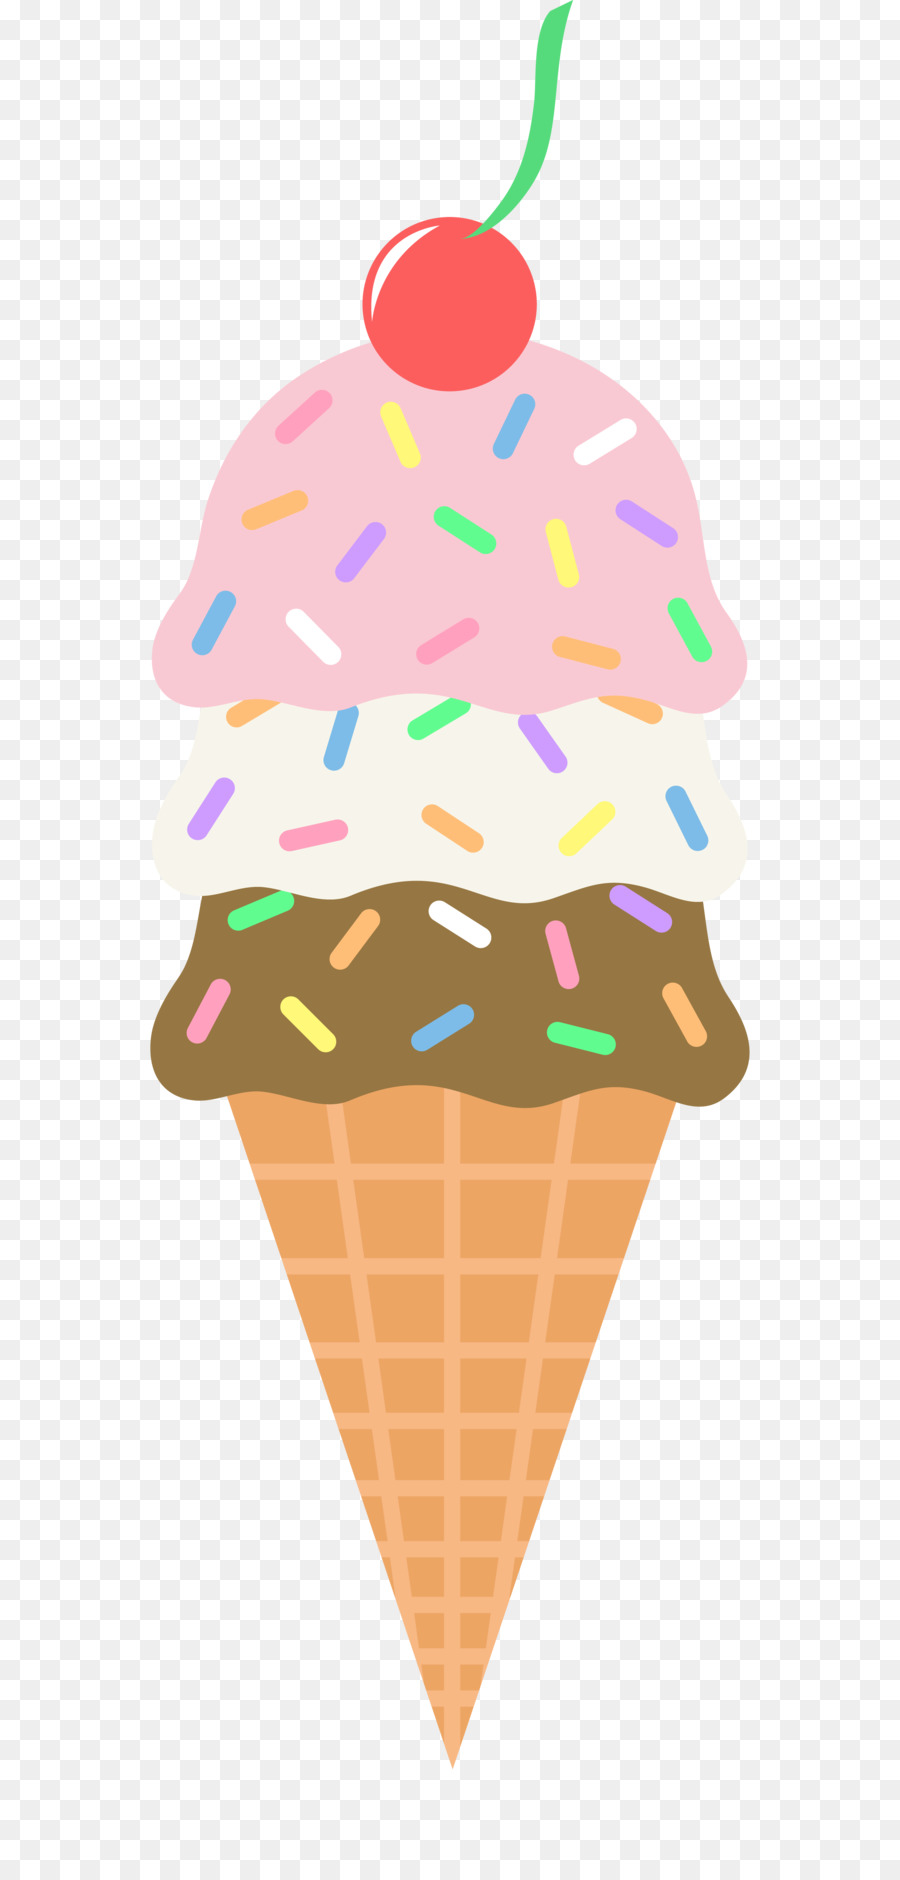 Ice cream cone Sundae Clip art - Ice Cliparts Transparent png download - 2713*5639 - Free Transparent Ice Cream png Download.